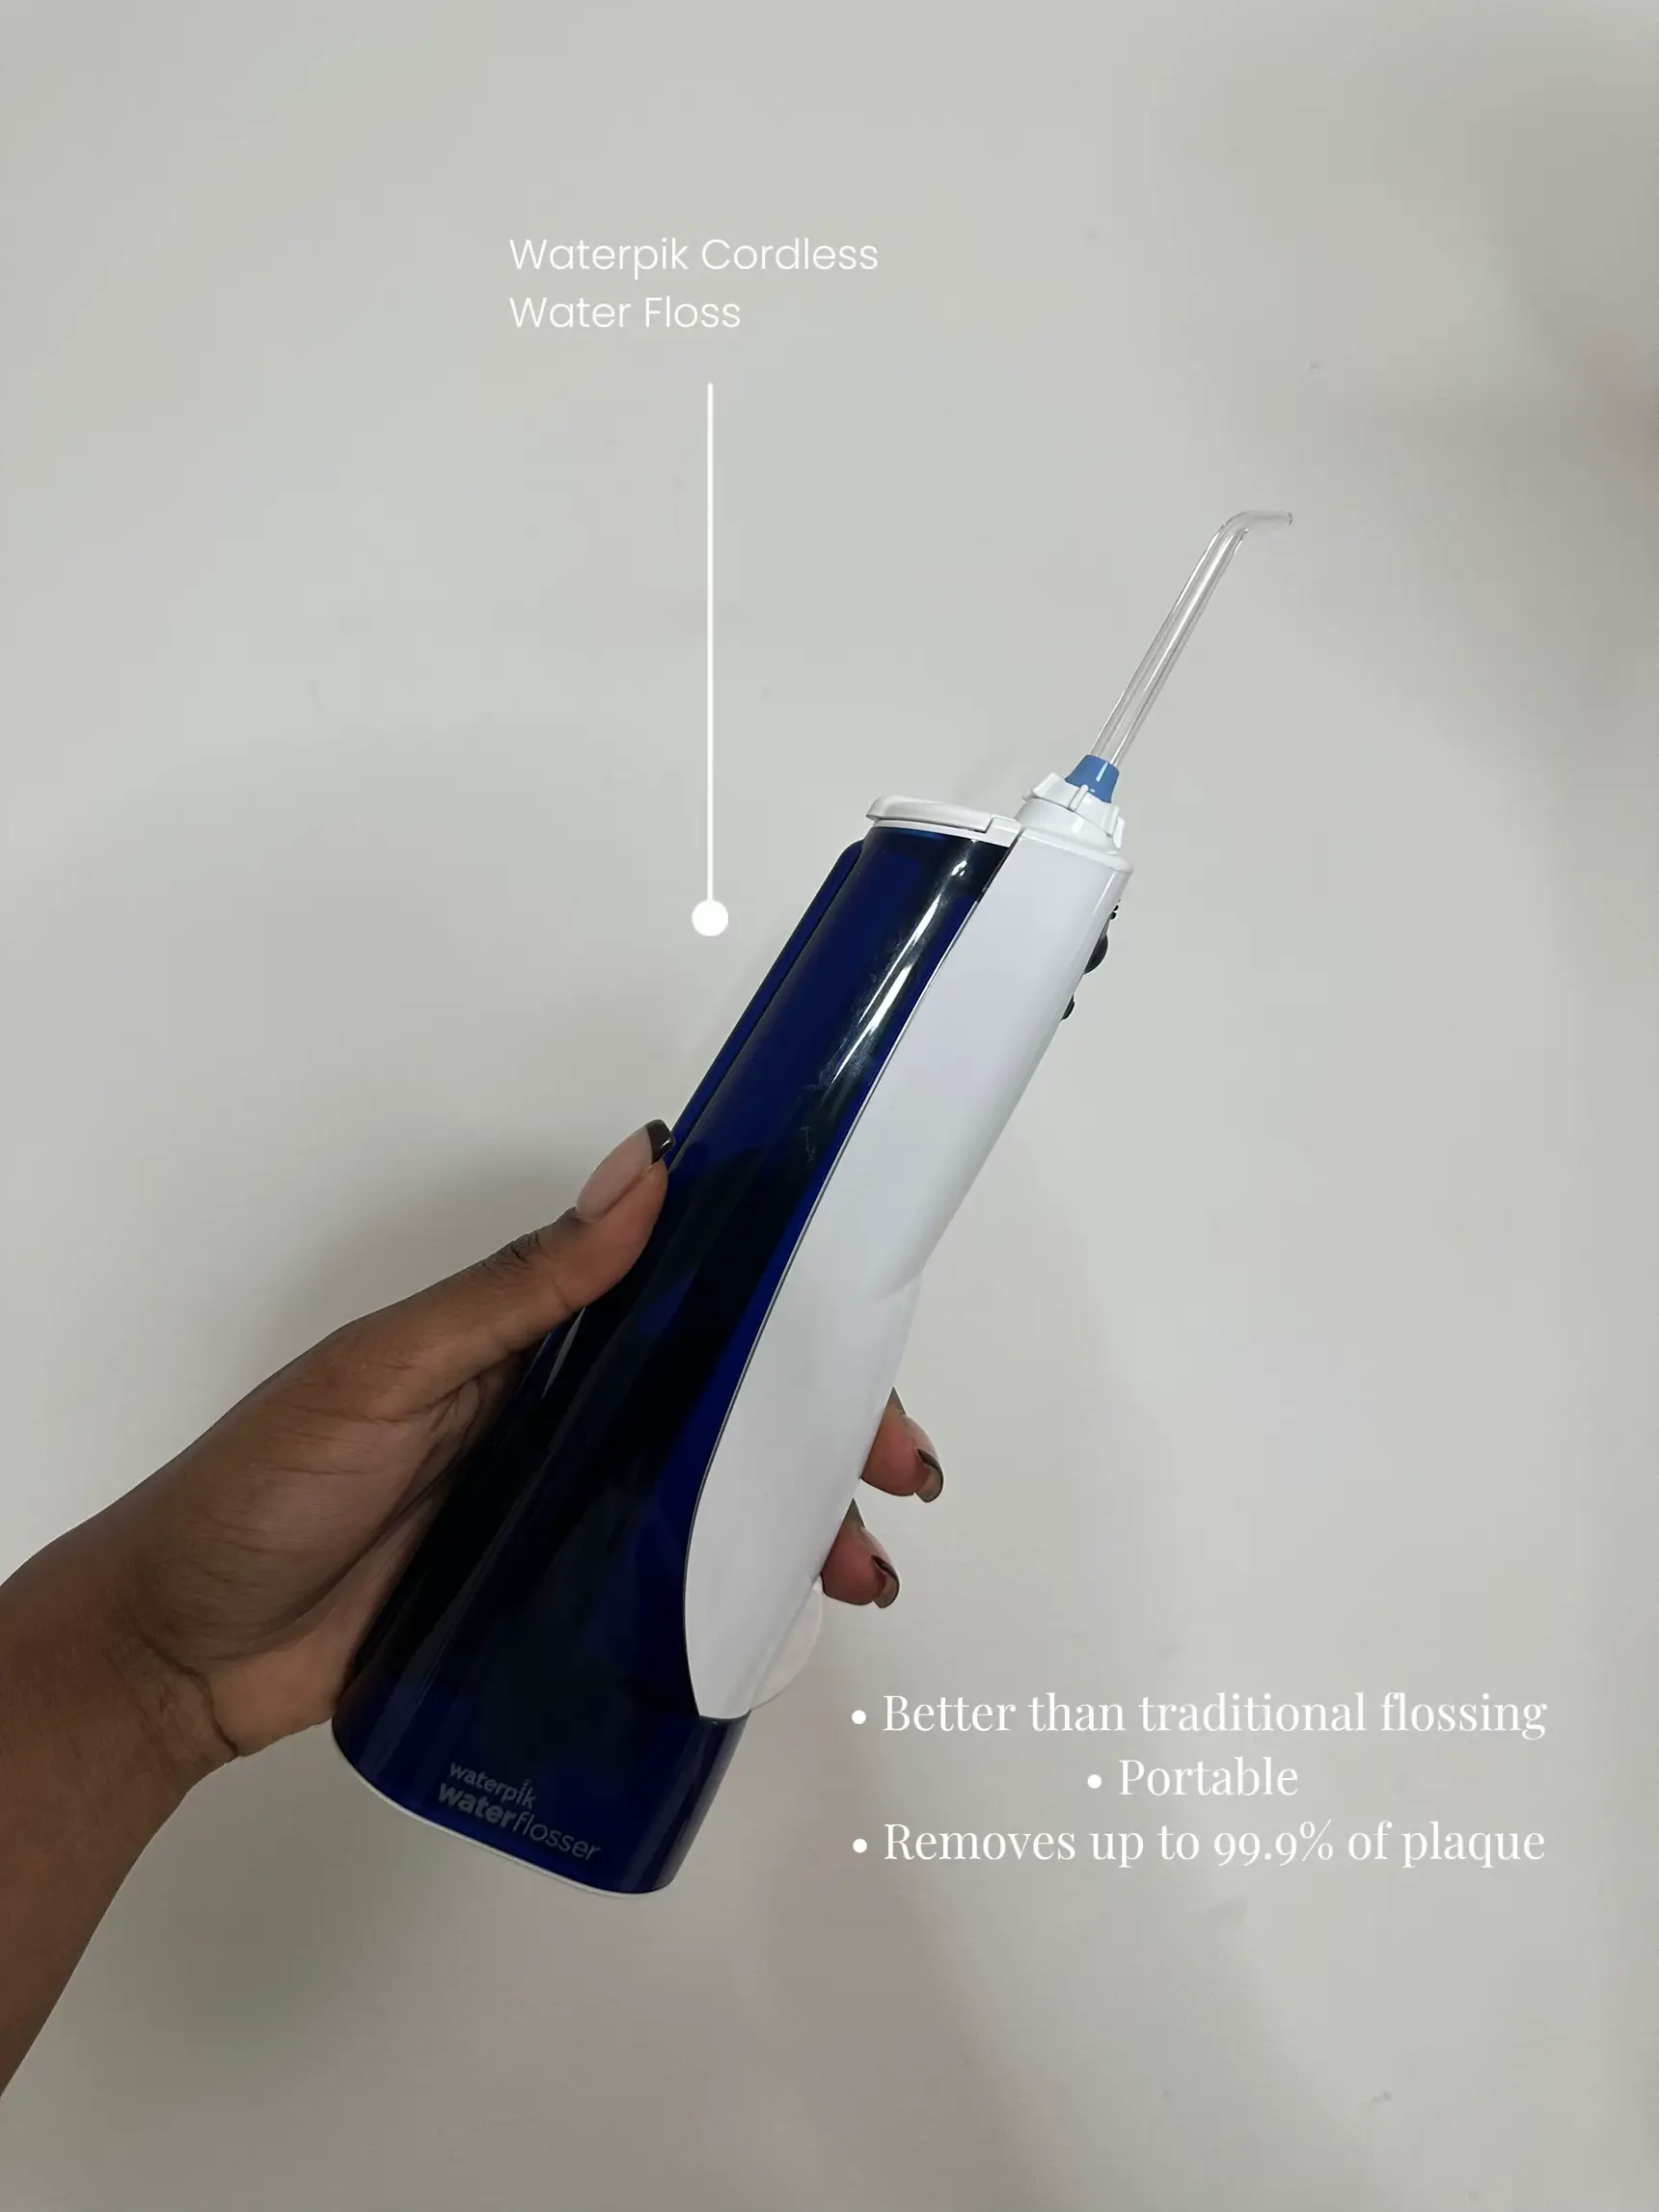  A person is holding a waterpik in their hand.